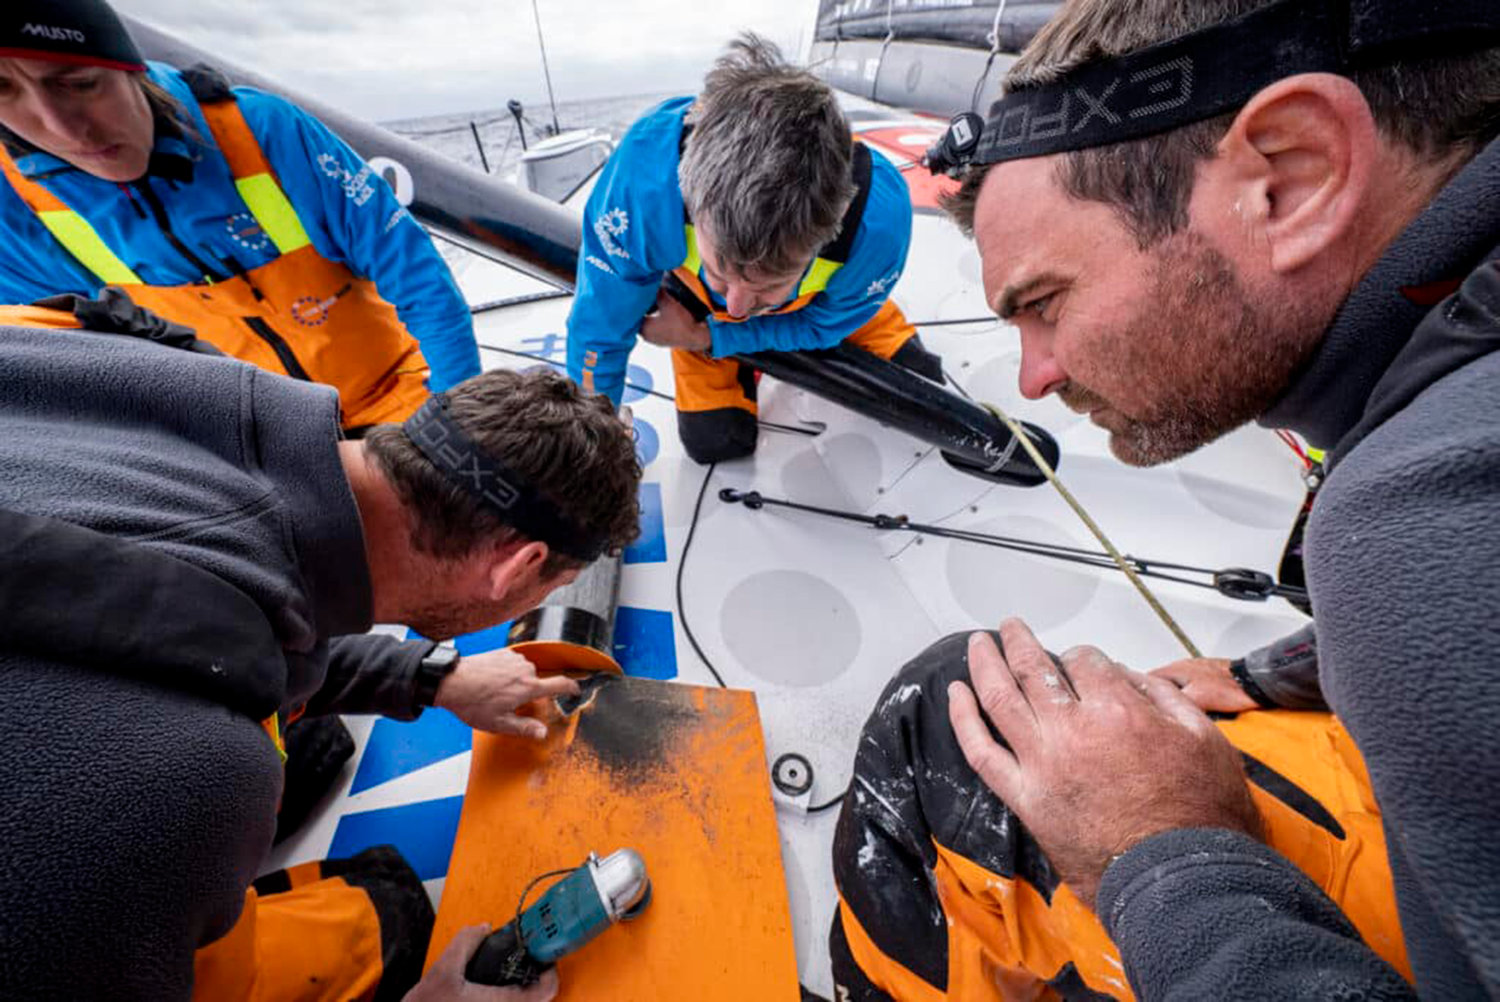 The Ocean Race 2022-23 - 07 March 2023, Leg 3 onboard 11th Hour Racing Team. The team watches as the outer layers of carbon are ground away, displaying the true extent of the cracks.